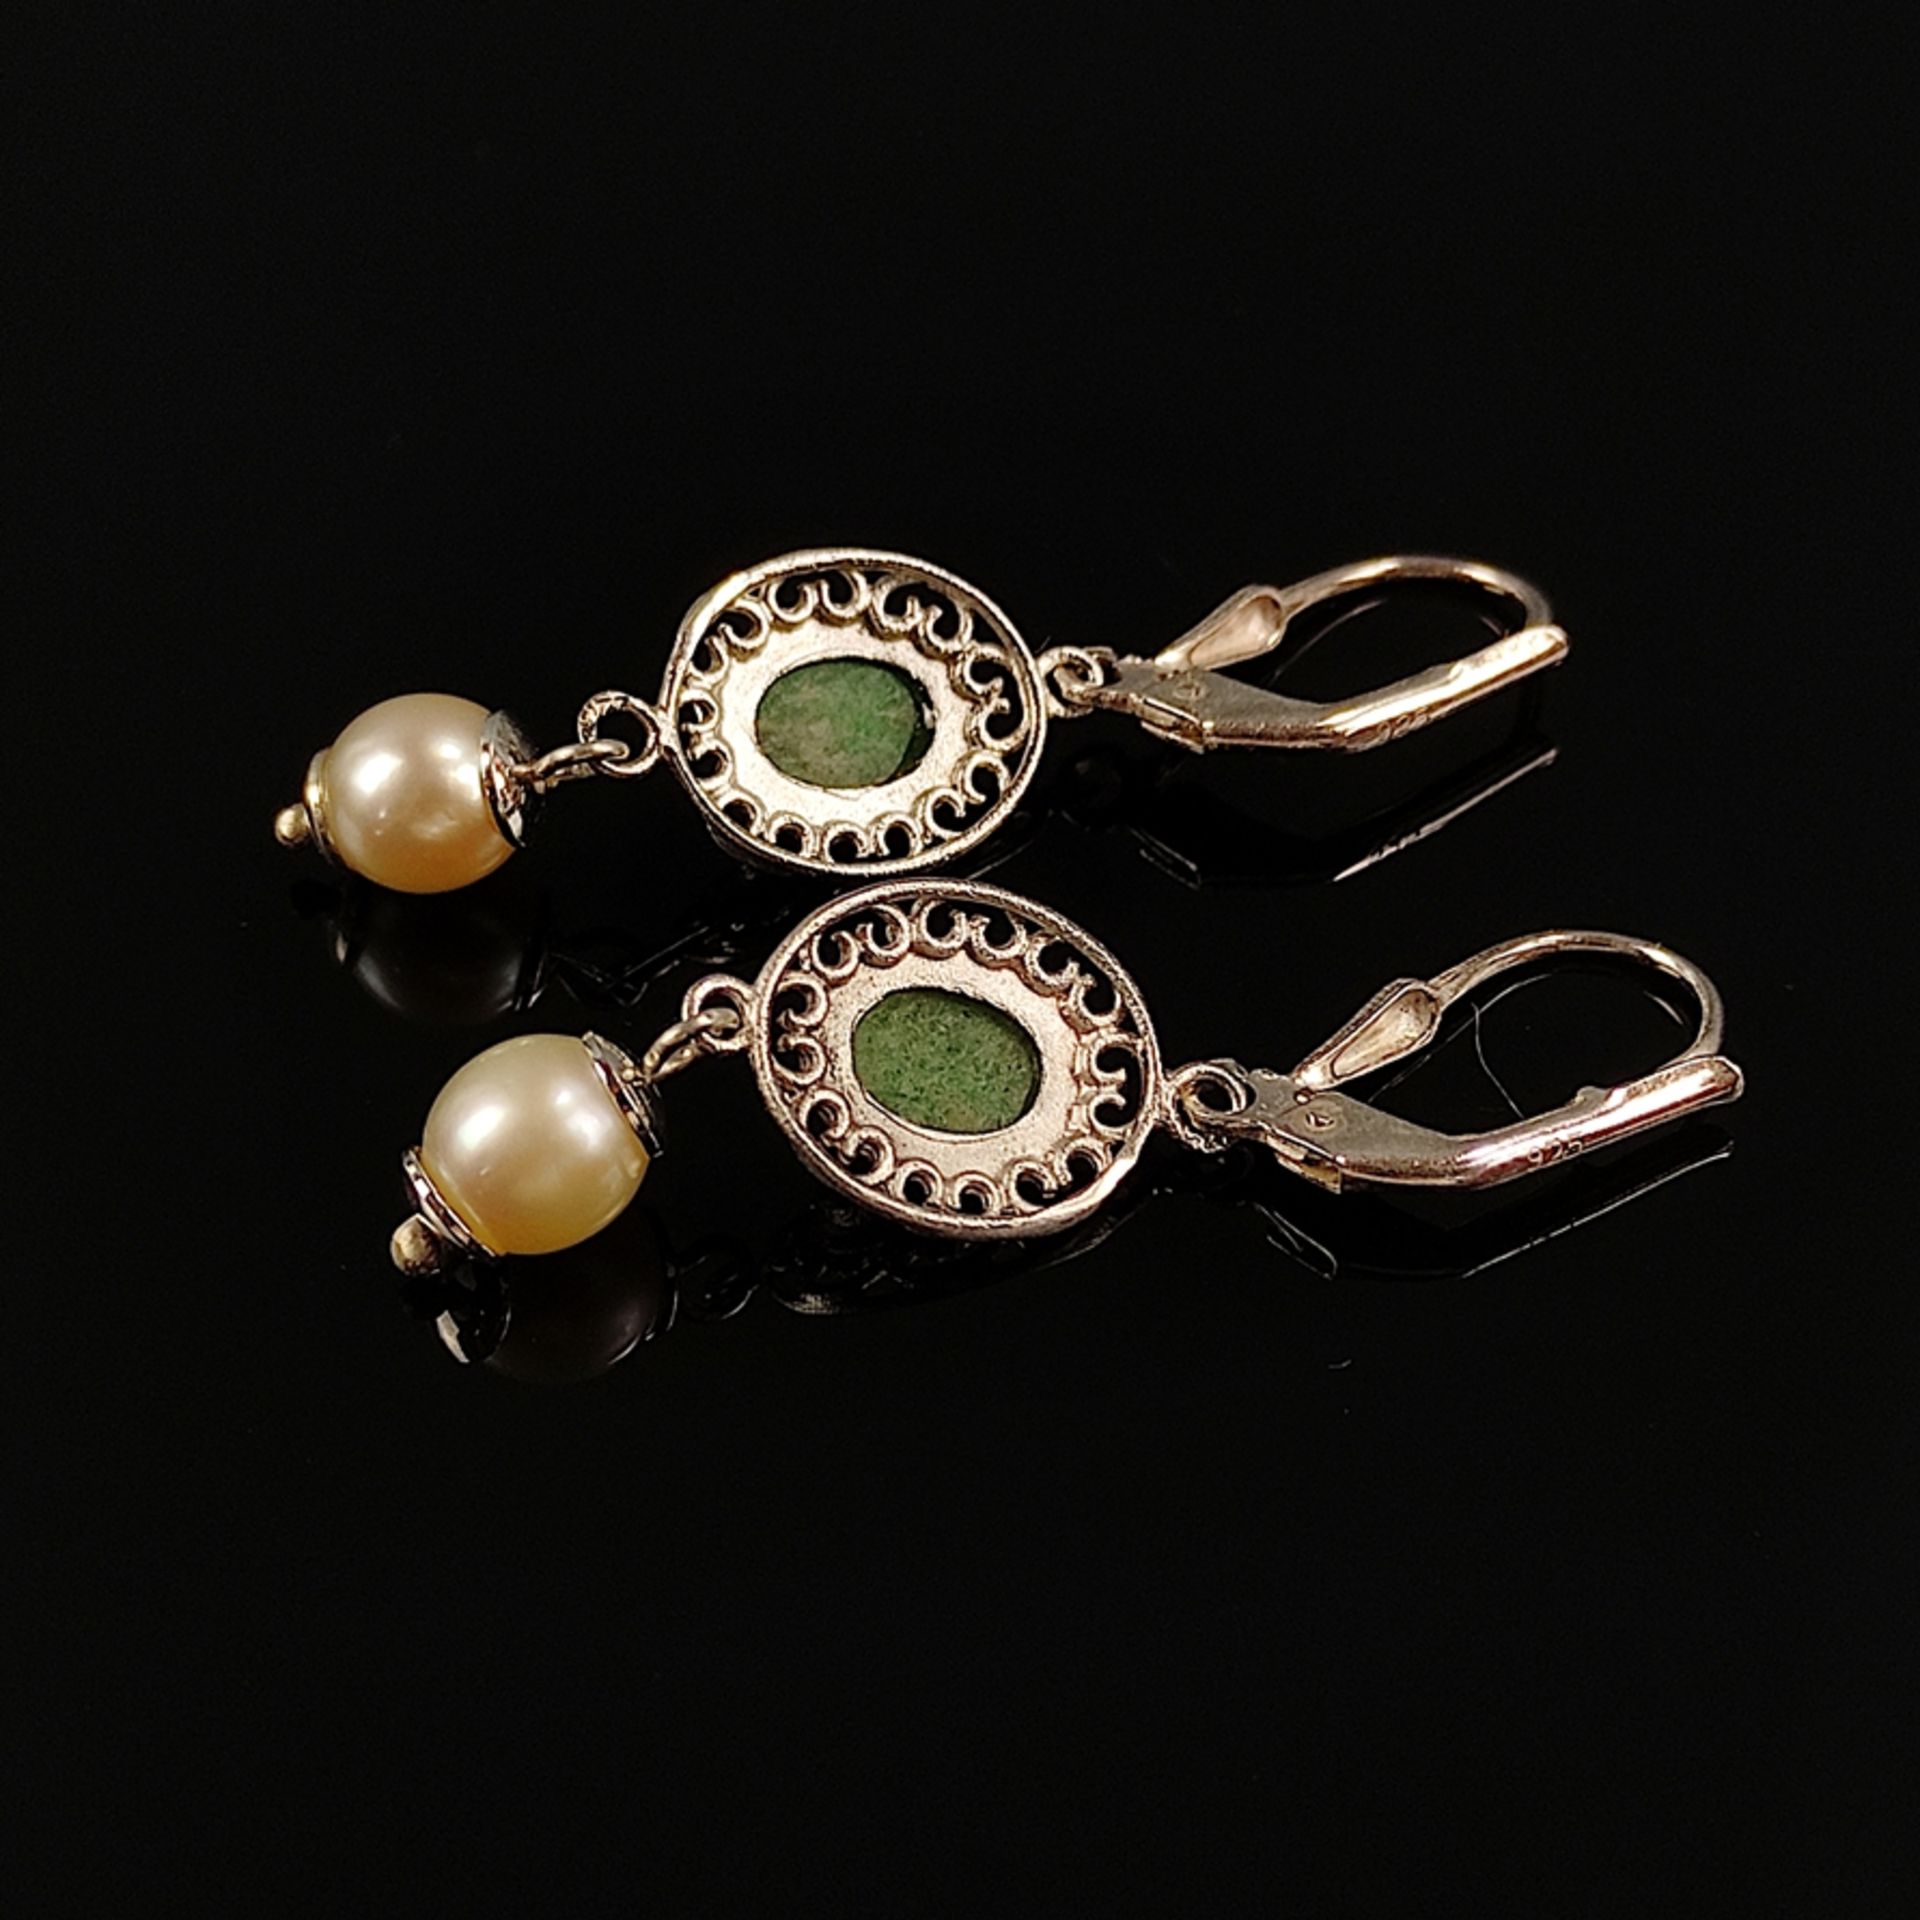 Jade-pearl earrings, silver 925, hinged earwire with reliefed oval suspensions set with oval caboch - Image 2 of 3